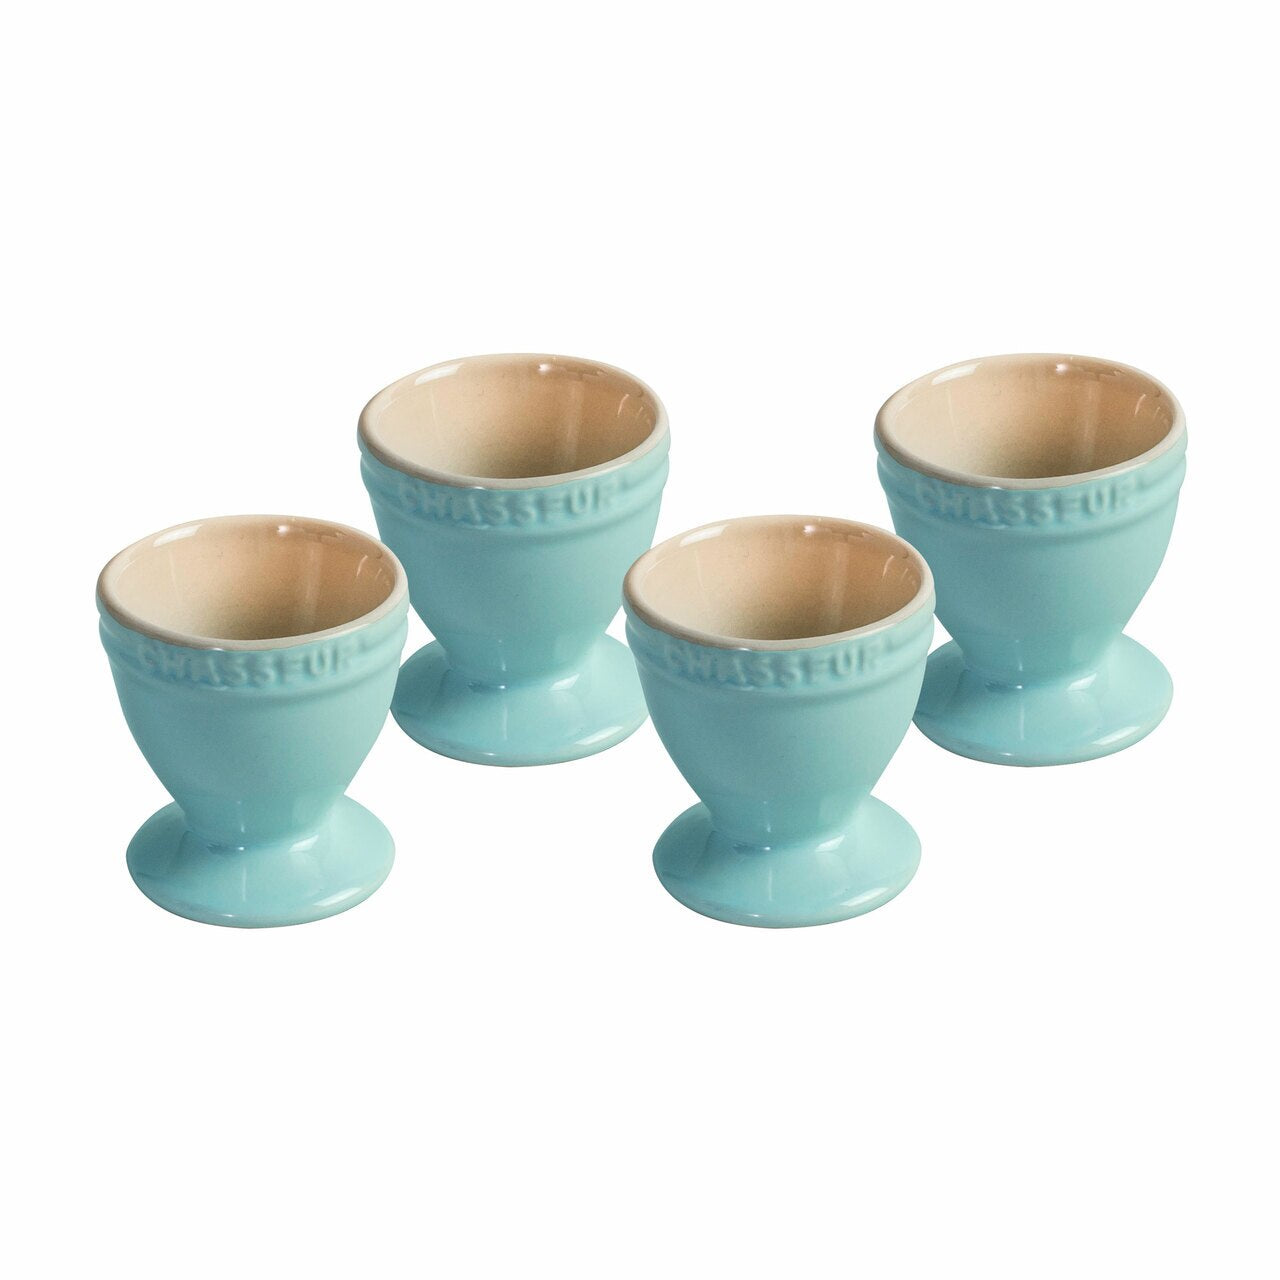 Chasseur Egg Cup Set of 4 Duck Egg Blue